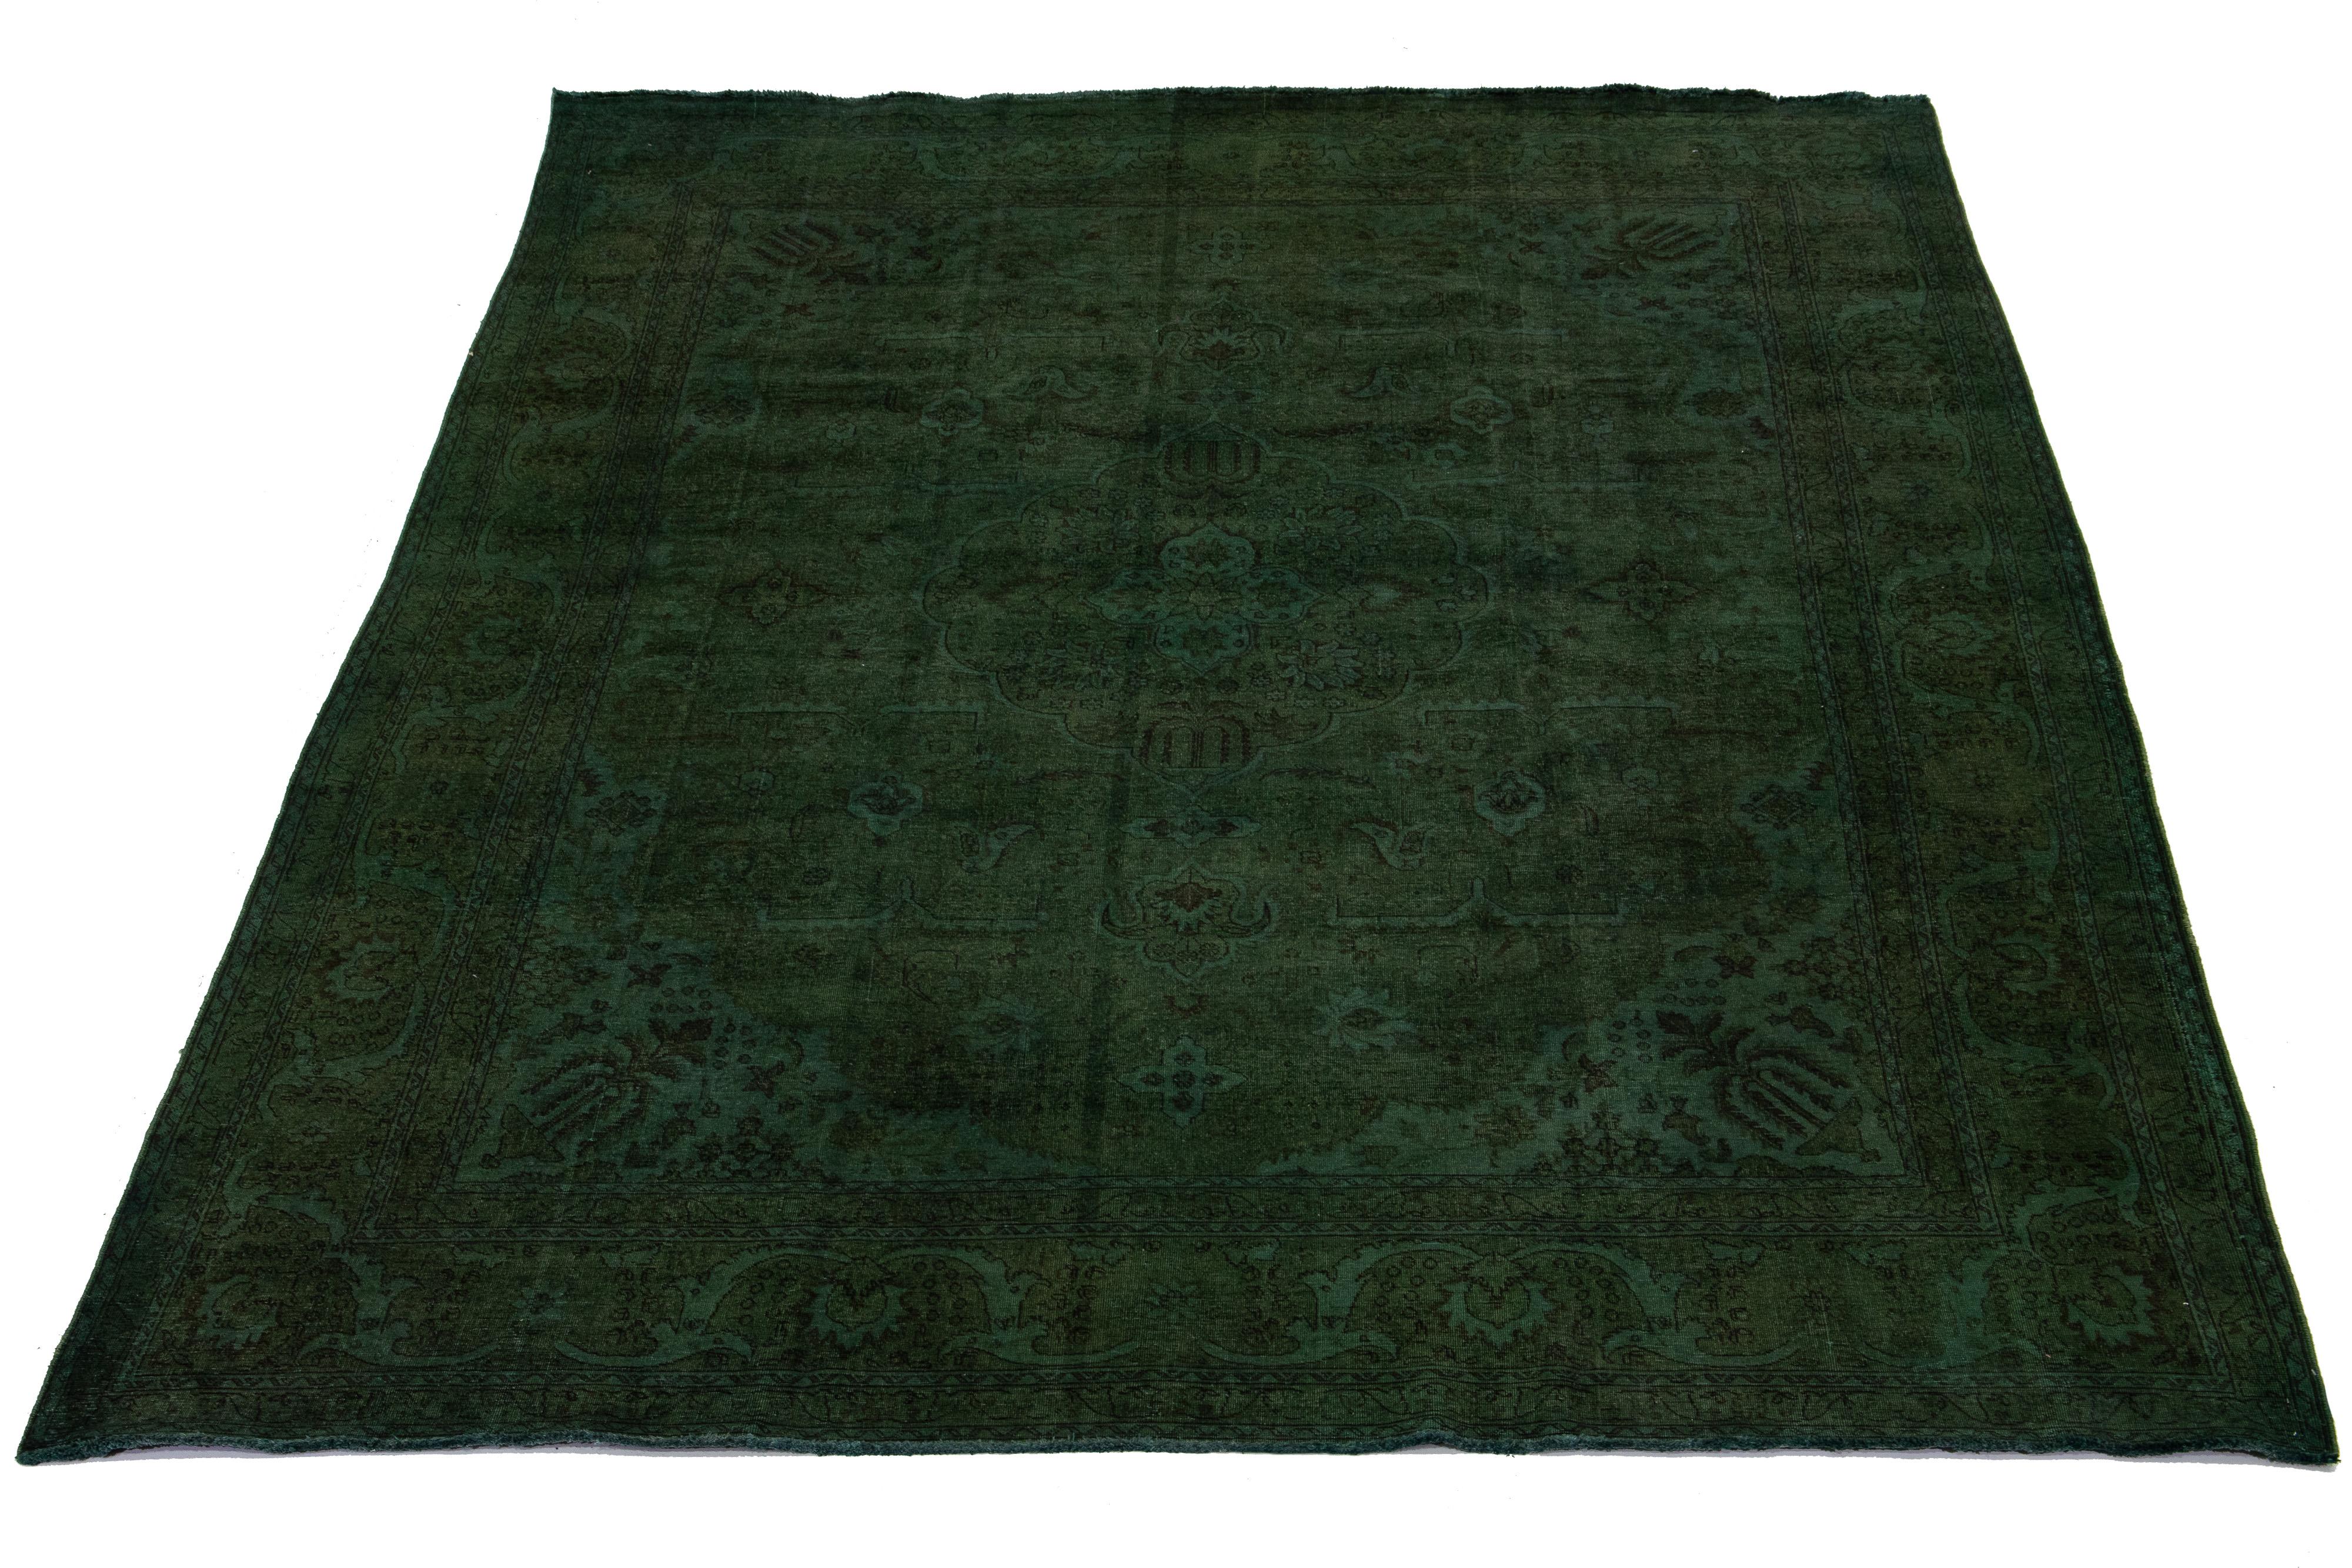 This is an antique hand-knotted wool Persian rug with a green field. It features a medallion floral design with brown accents.

This rug measures 11'2'' x 15'8